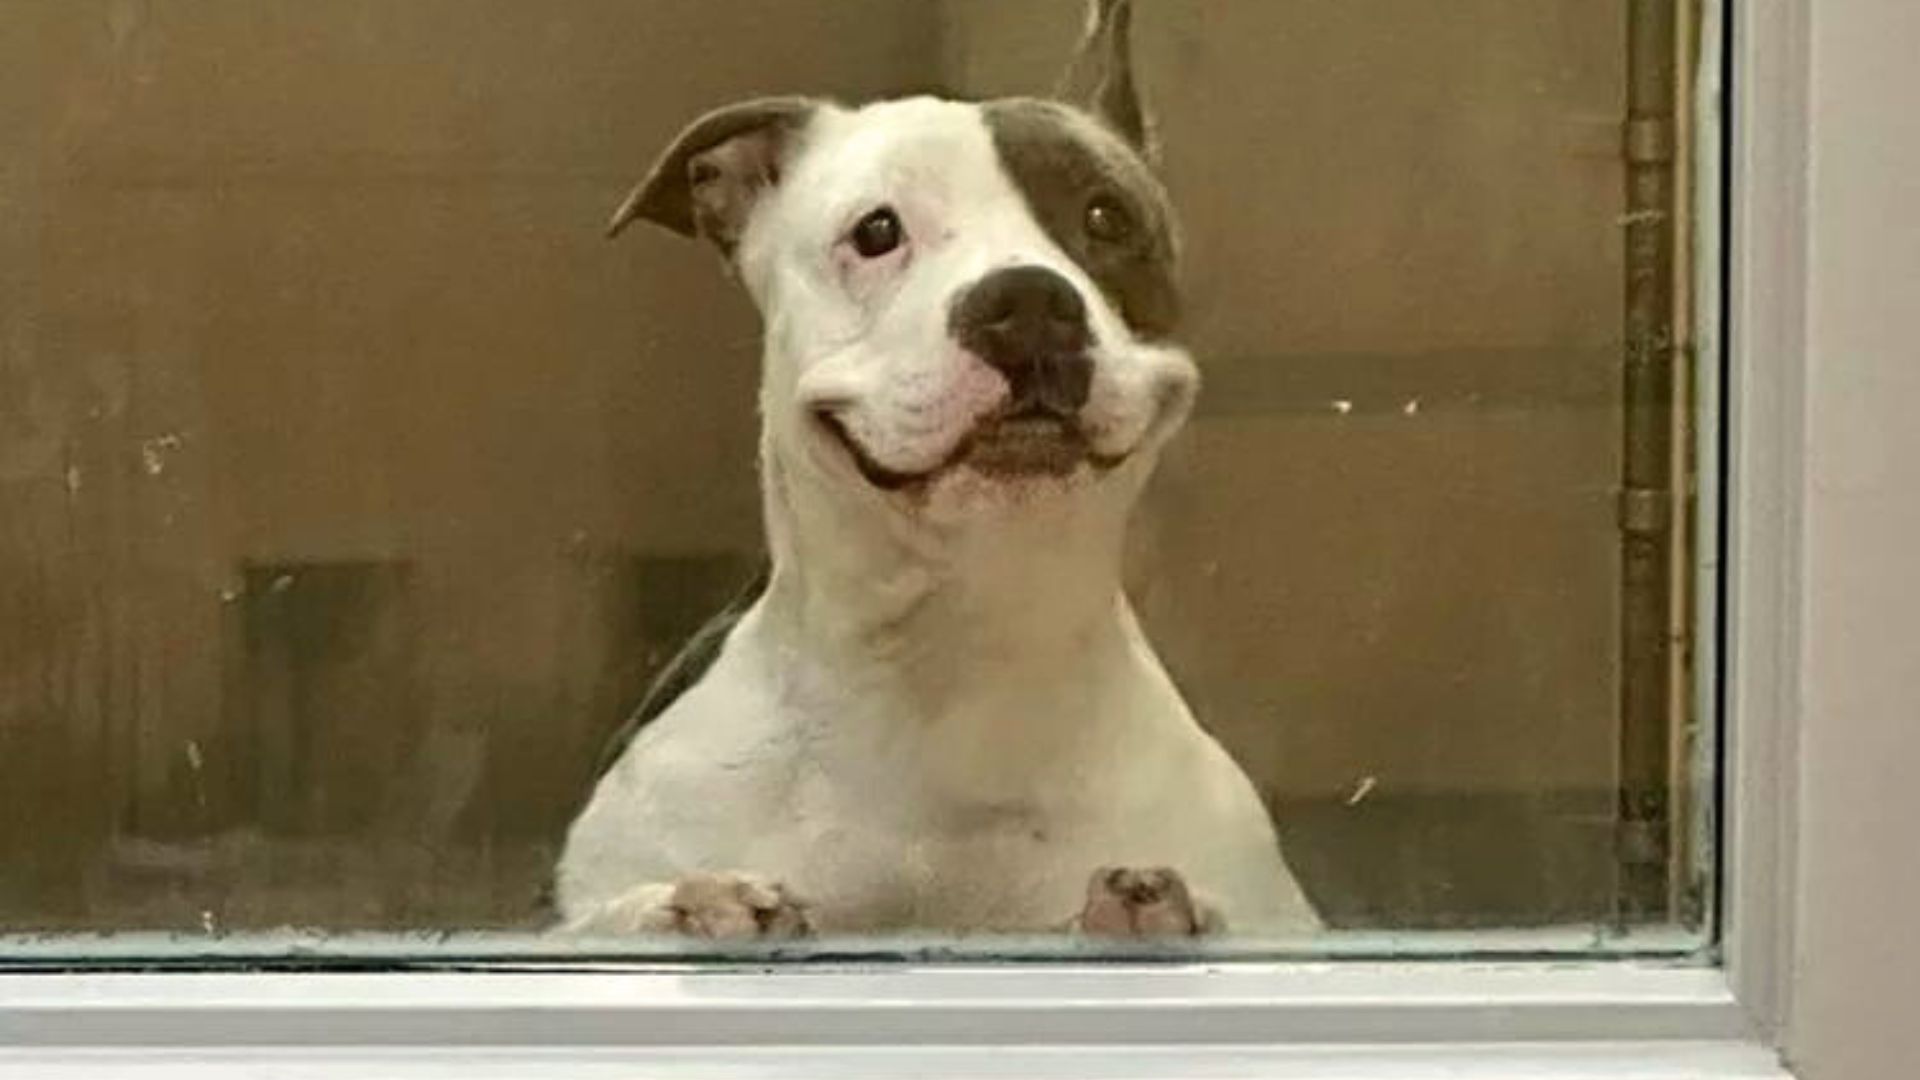 Shelter Dog Showers Everyone With The Biggest Smile, Hoping To Be Adopted